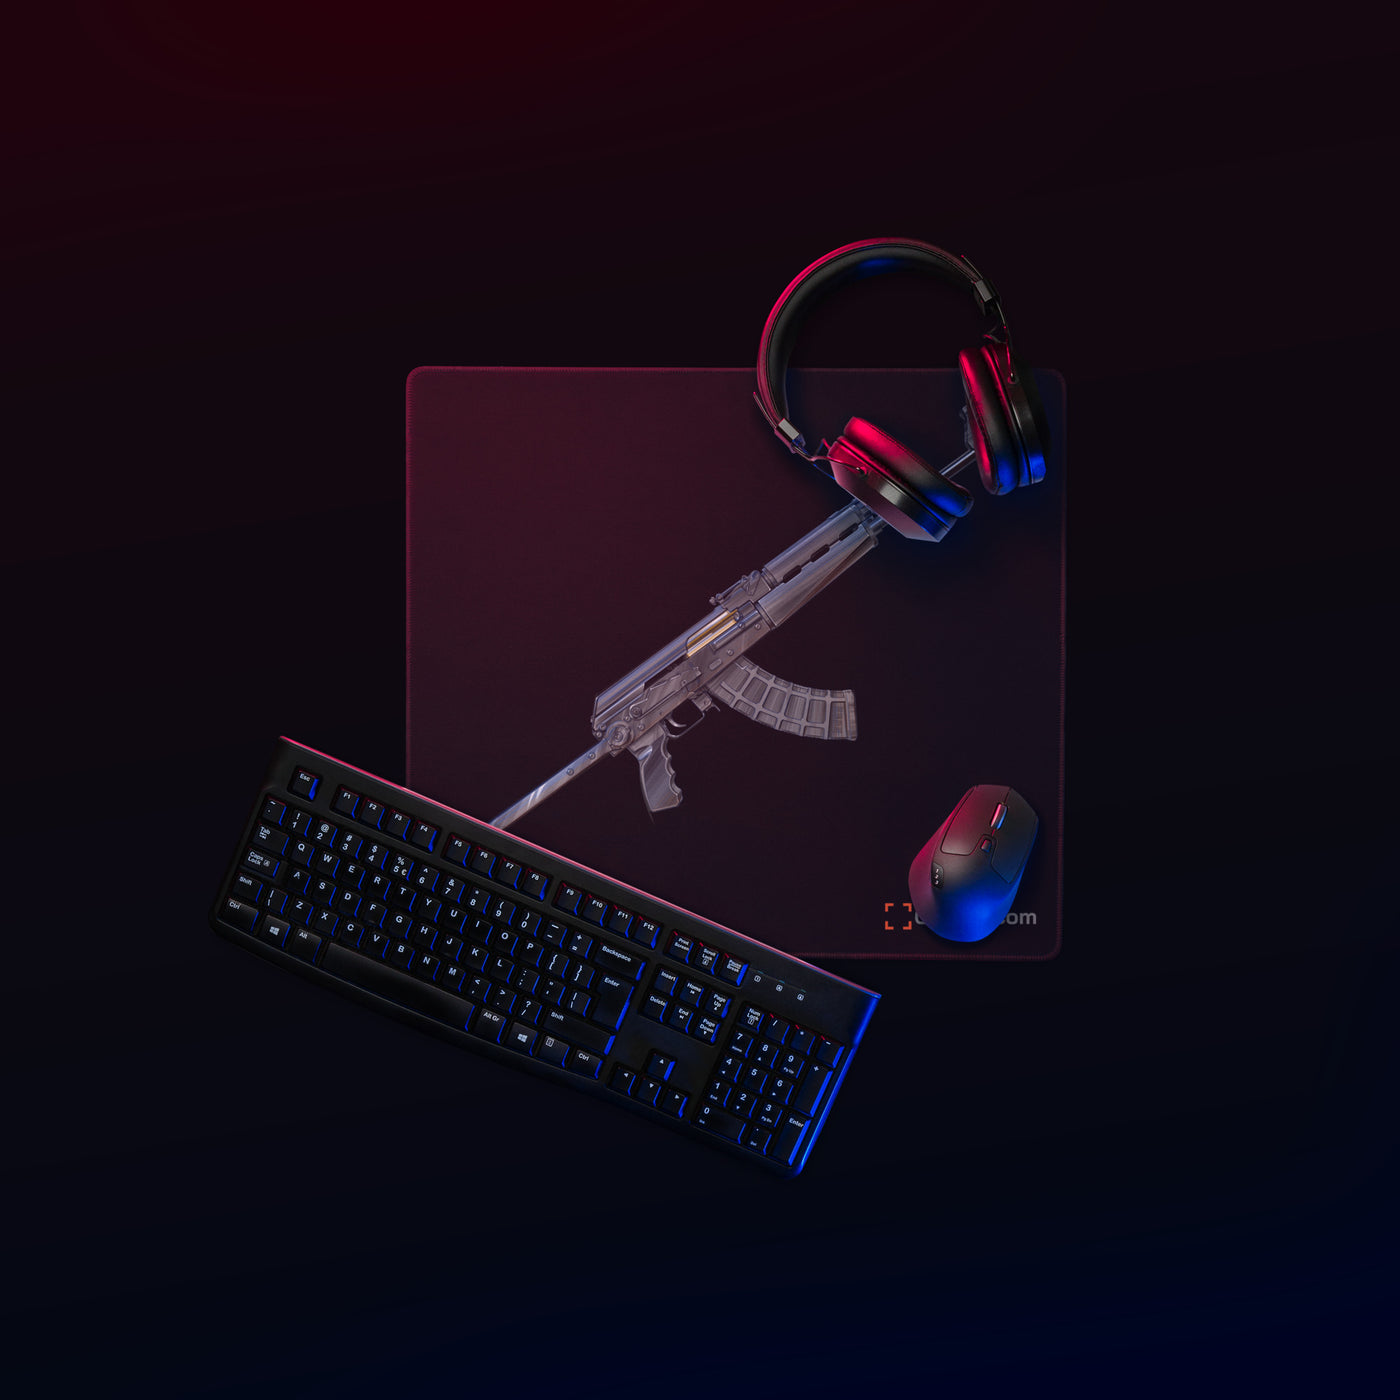 The Paratrooper / AK-47 Underfolder Gaming Mouse Pad - Just The Piece - Black Background